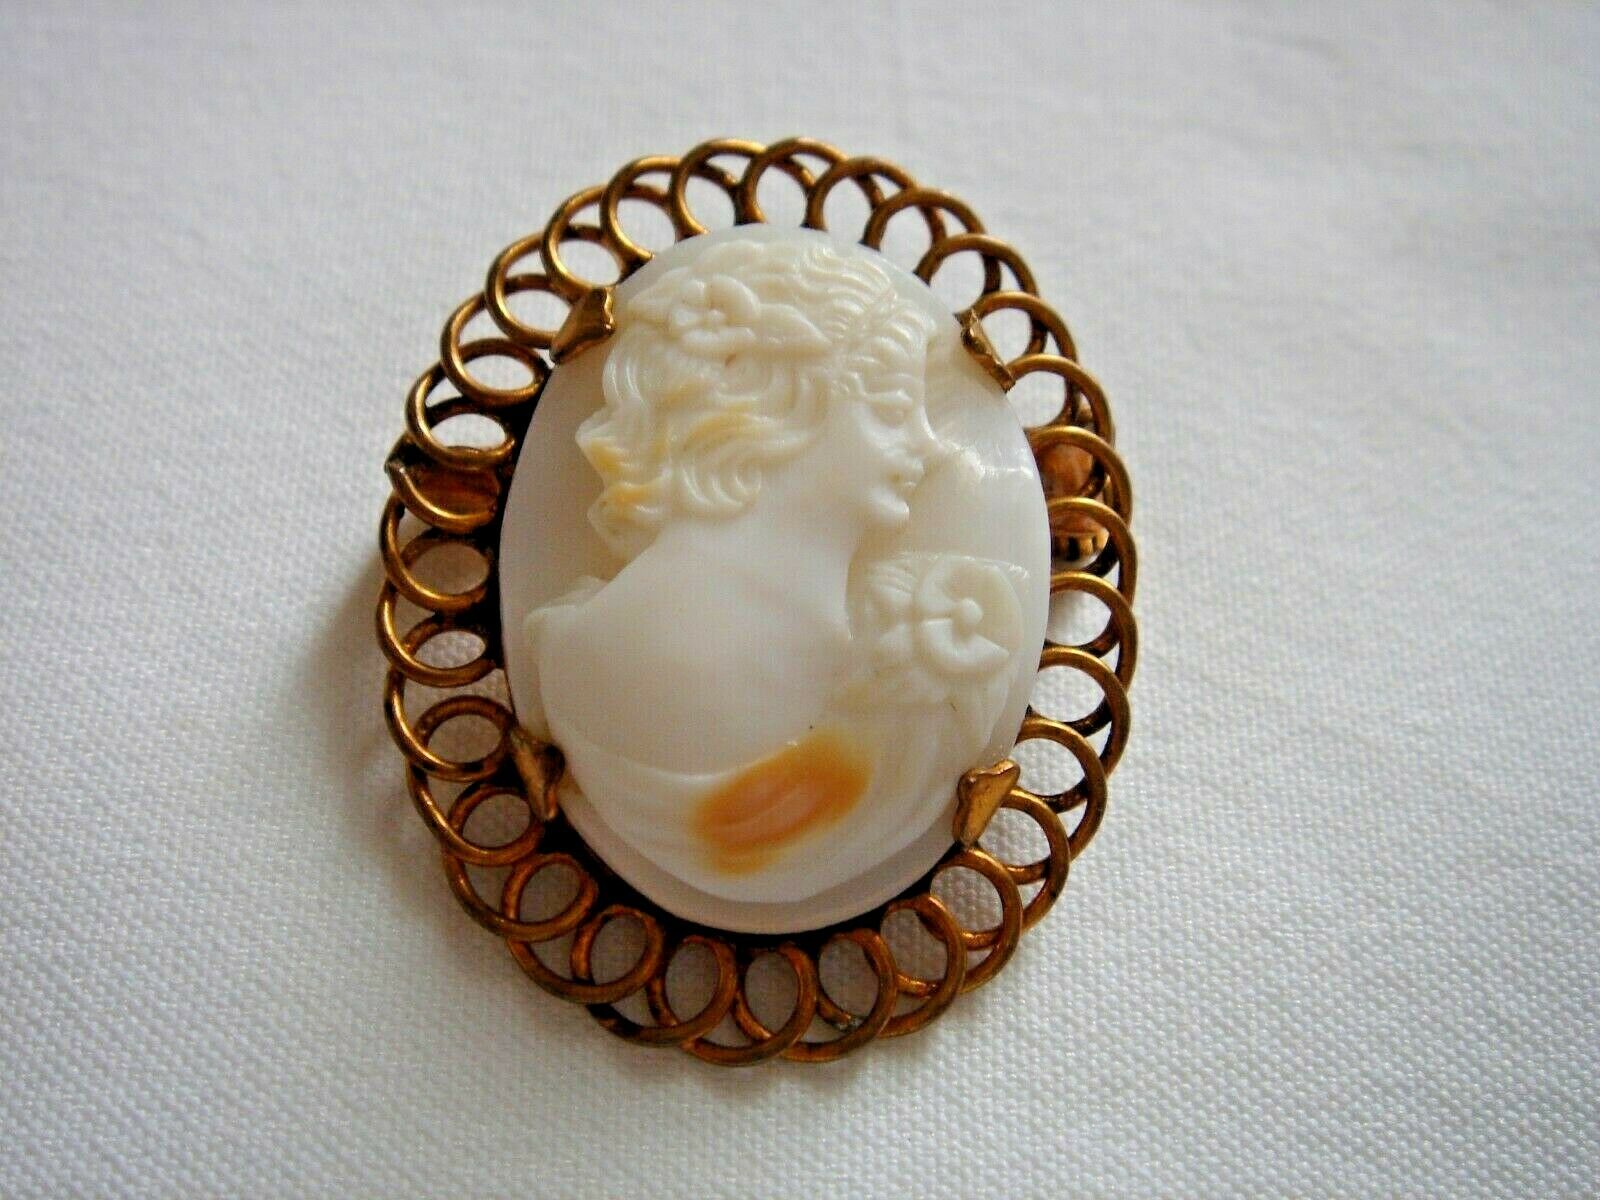 Vintage Genuine Carved Shell Cameo  Brooch  Free Shipping